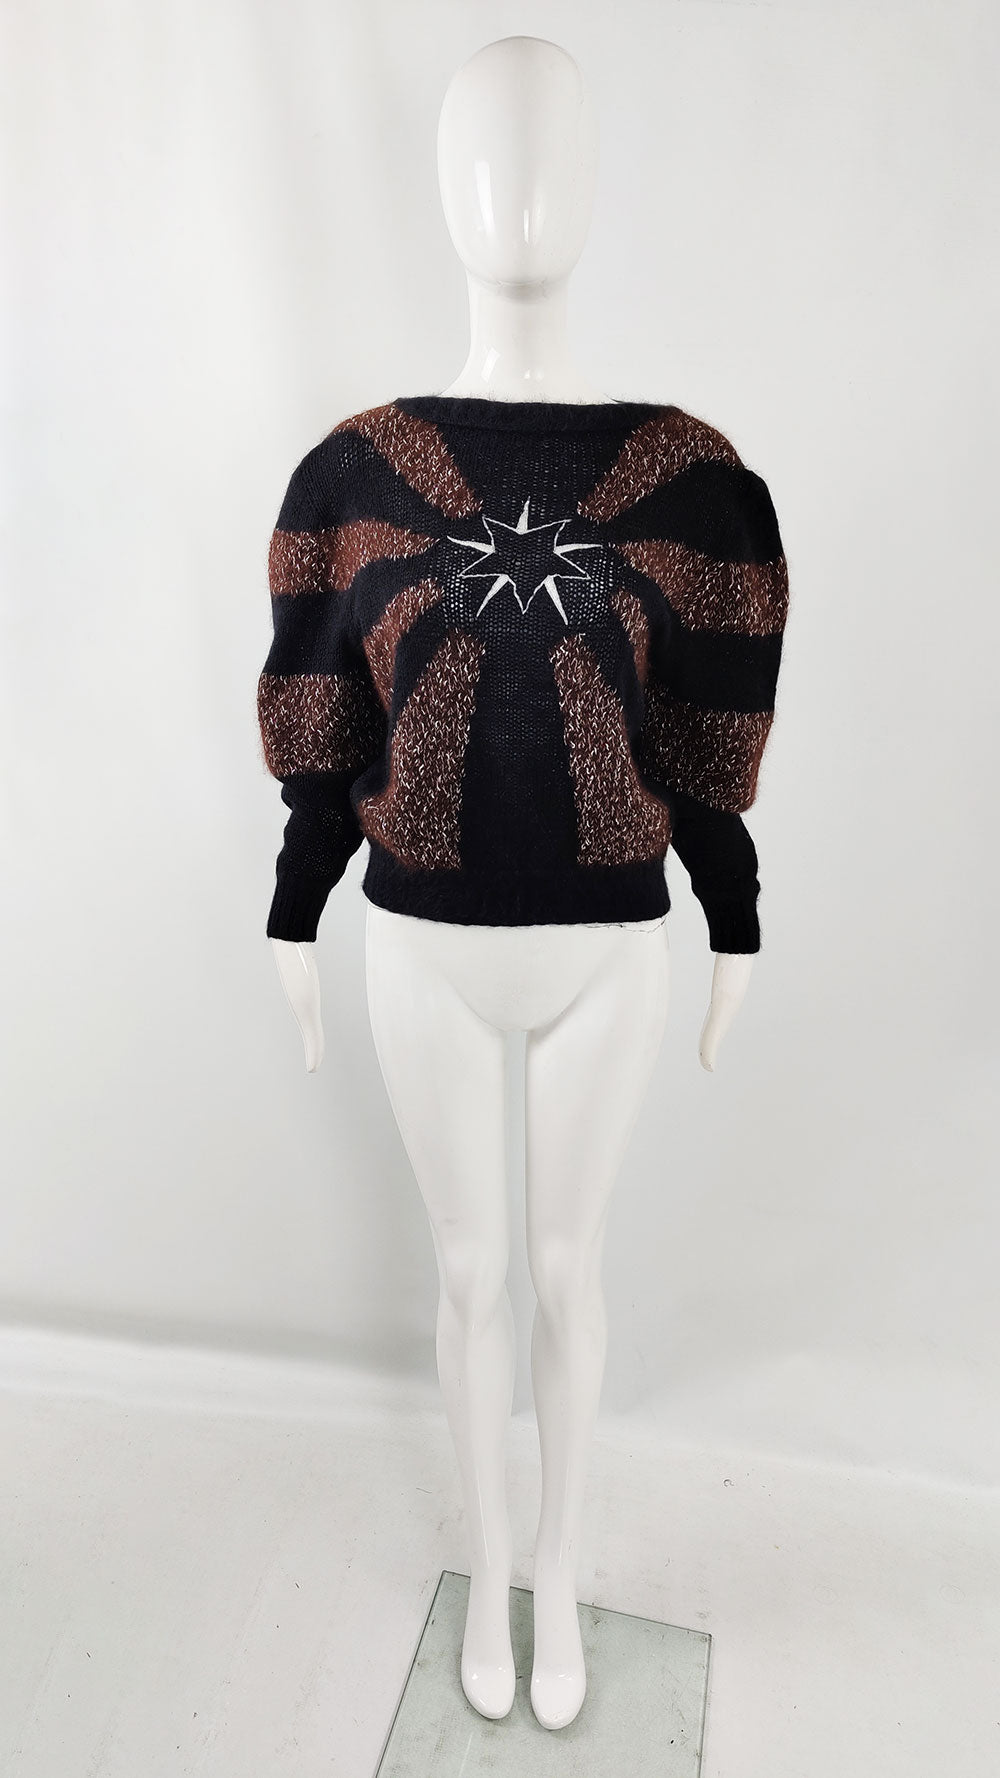 A mannequin wearing a vintage Thierry Mugler jumper in a black and brown angora wool with a star on the centre of the chest.